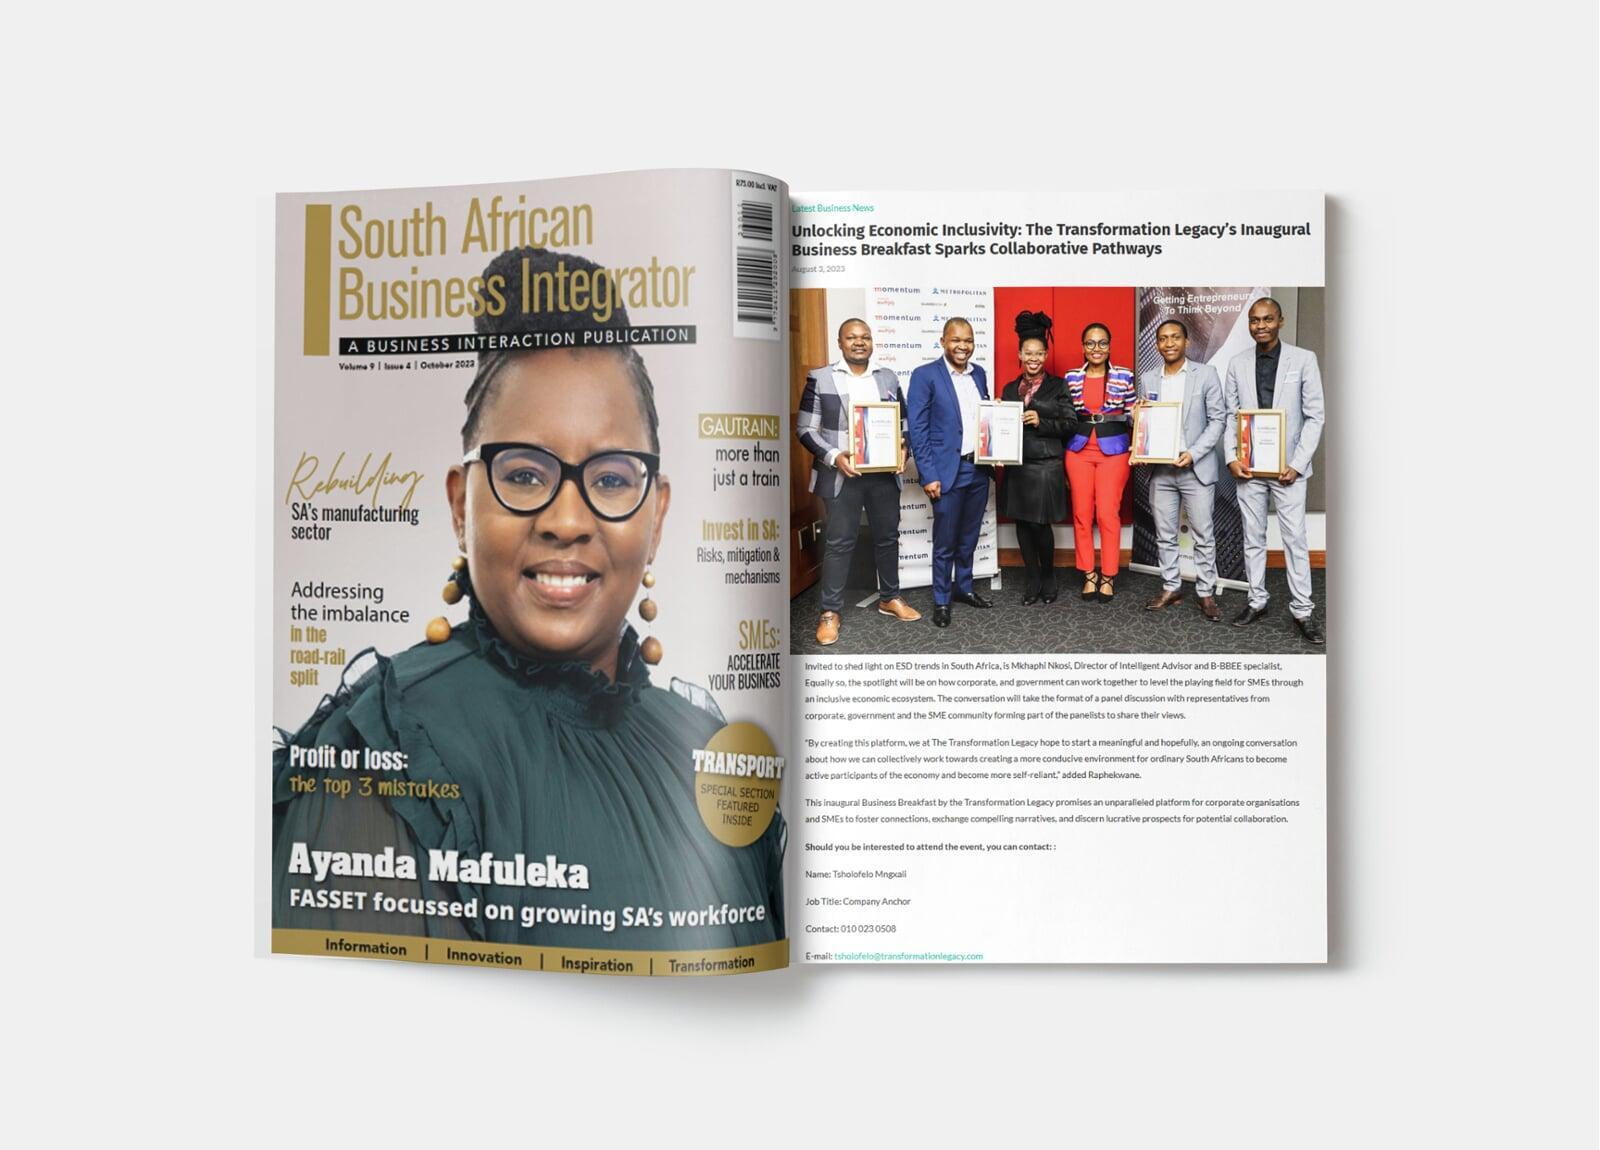 SA Business Integrator:  Unlocking Economic Inclusivity: The Transformation Legacy’s Inaugural Business Breakfast Sparks Collaborative Pathways